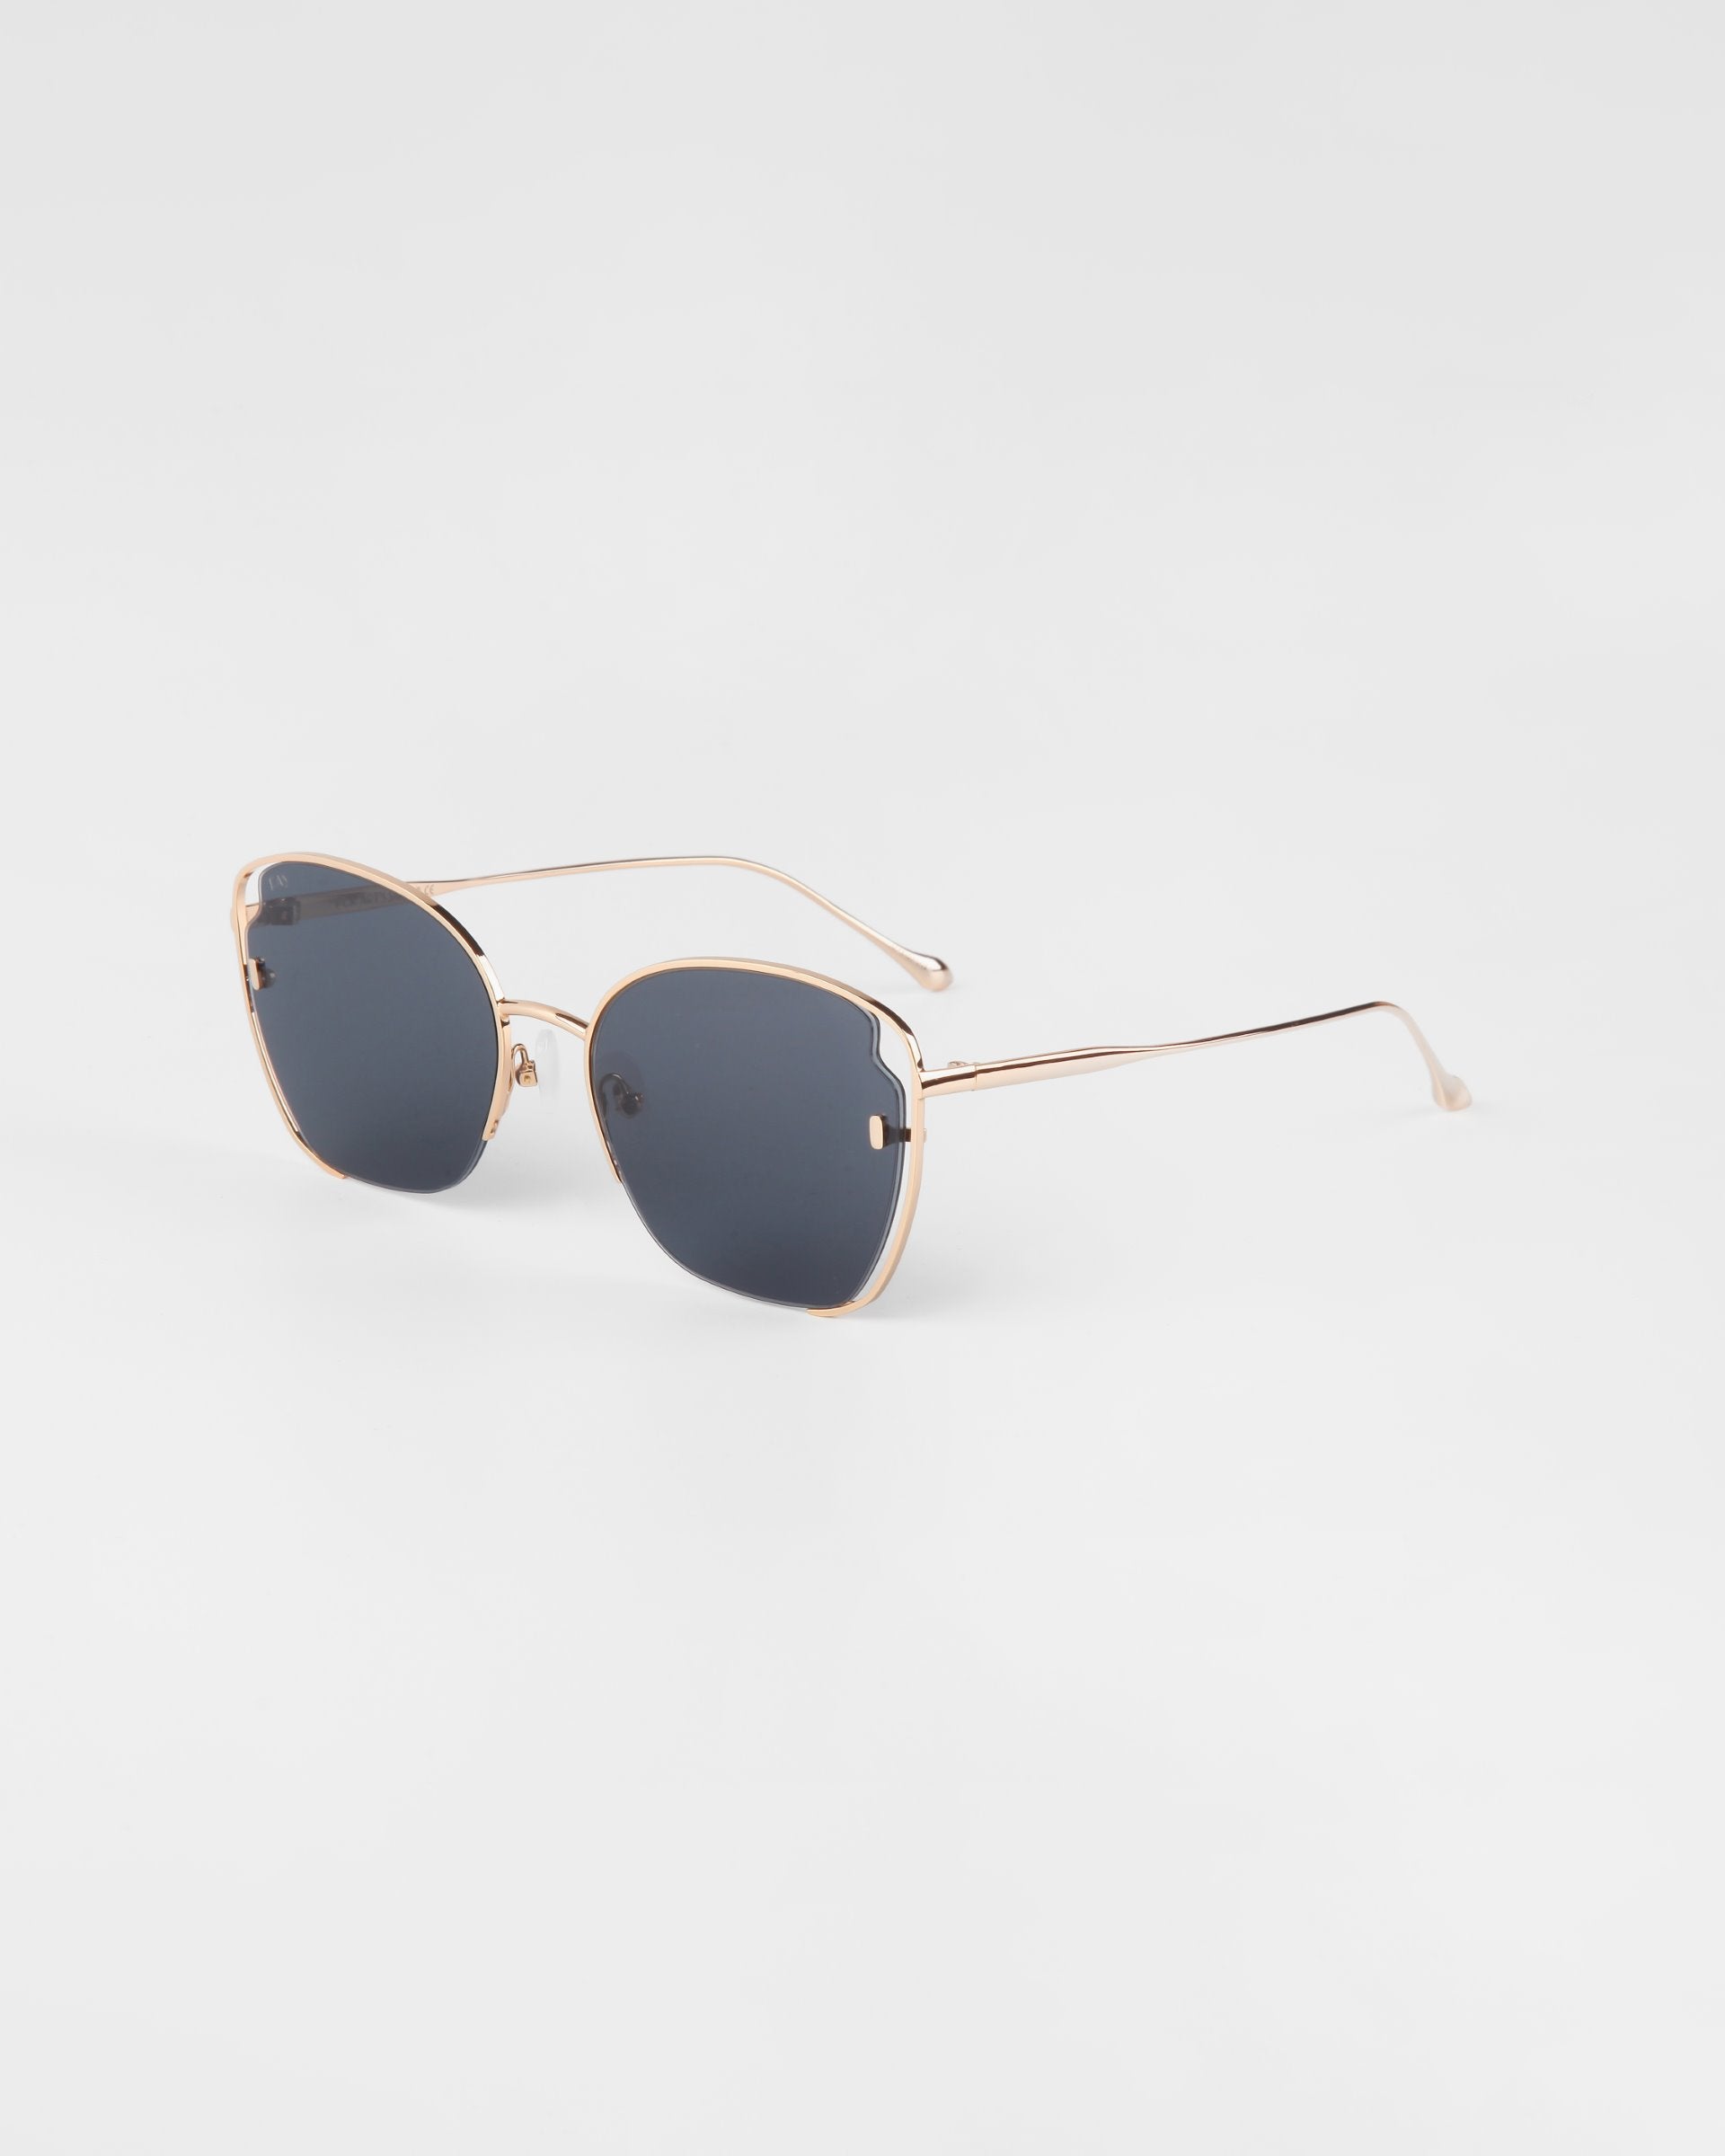 A pair of For Art&#39;s Sake® Eden sunglasses with 18-karat gold-plated frames and dark tinted lenses. The design features thin, elegant arms and a minimalistic yet modern aesthetic, set against a plain white background. Enjoy both style and protection with UVA &amp; UVB-protected lenses.